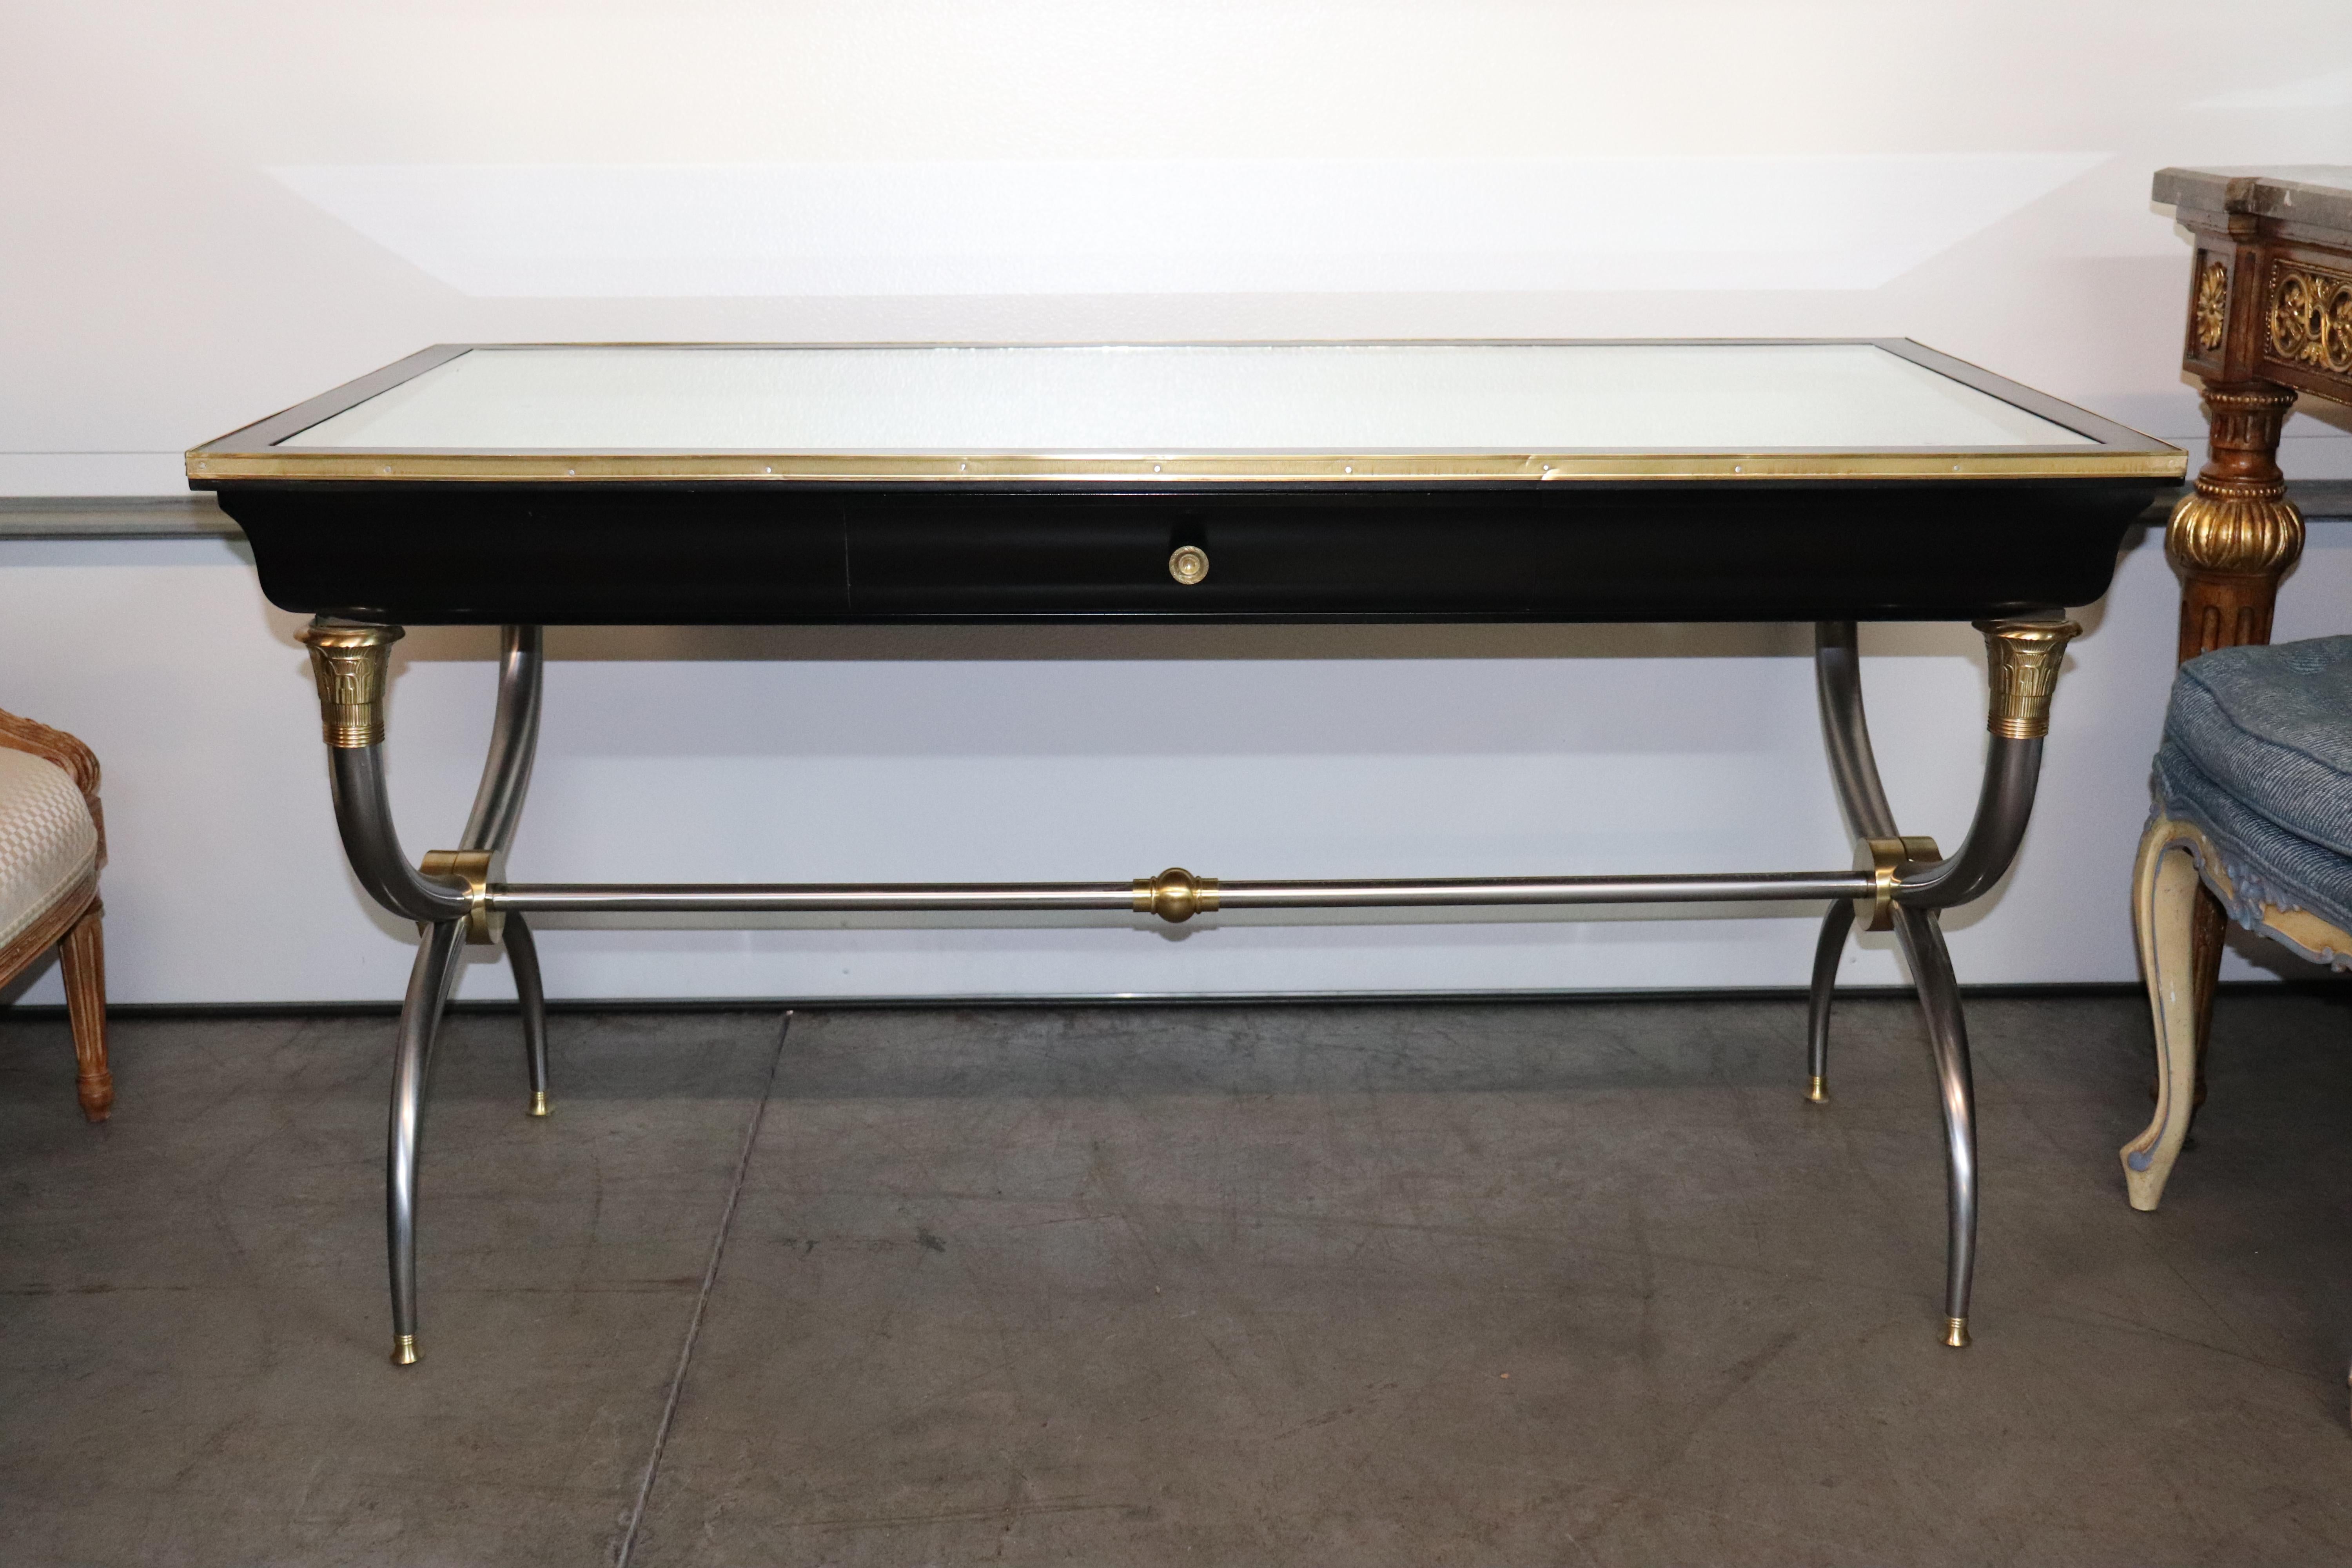 This is a stunning desk that was perhaps made by John Vesey, but we can't say with any degree of certainty. The elements are there, the steel and brass used to create the more average wooden attributes of French Directoire design. The antique-aged